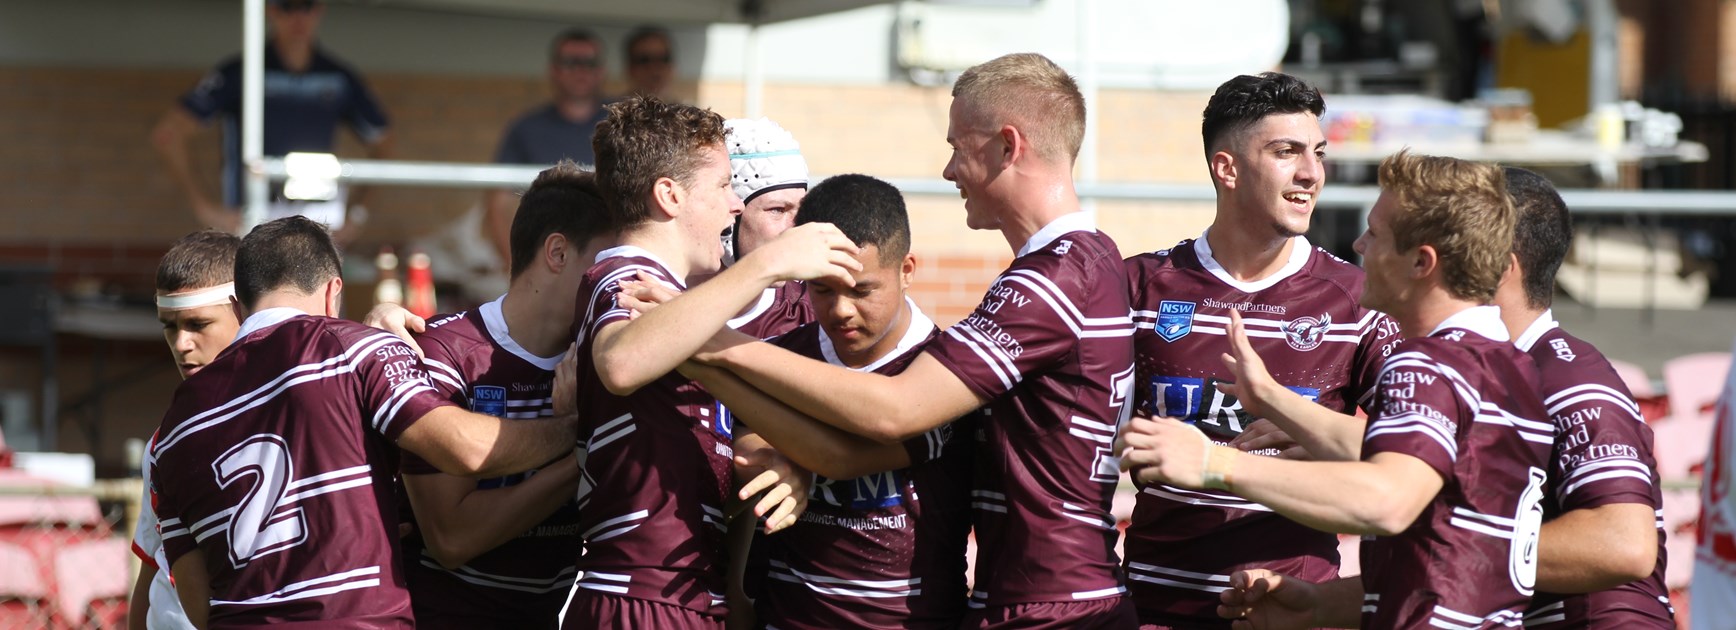 Sea Eagles side to play Magpies in Harold Matthews